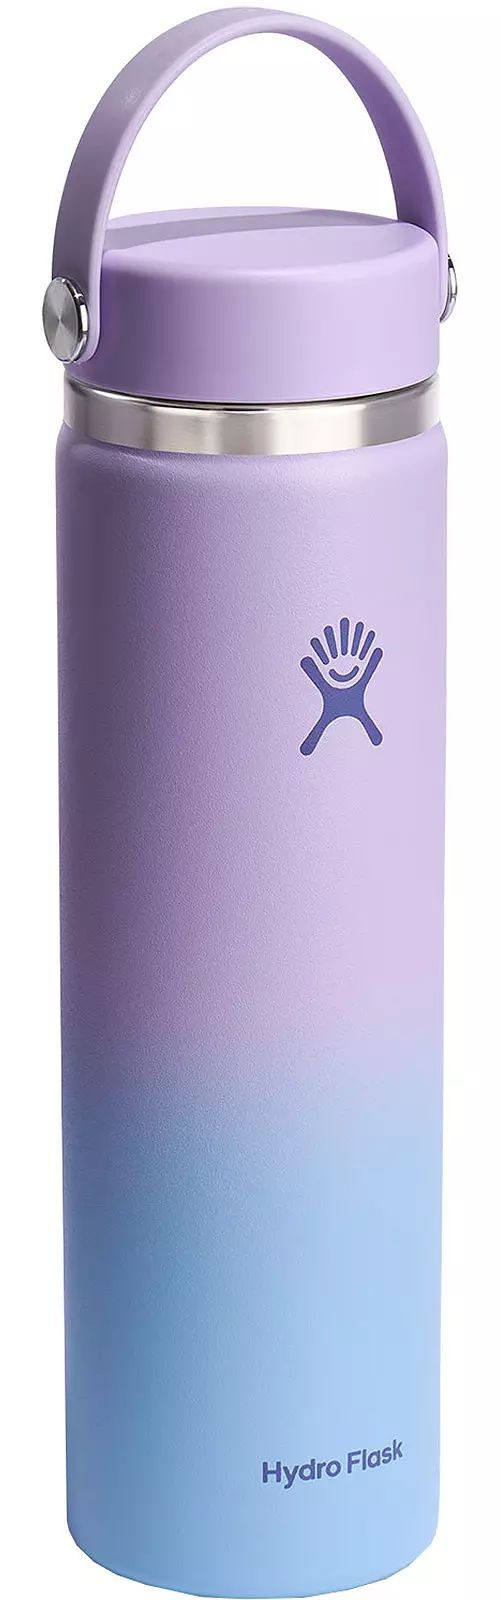 Hydro Flask Polar Ombré Collection Wide Mouth 24 Oz. Bottle | Dick's Sporting Goods